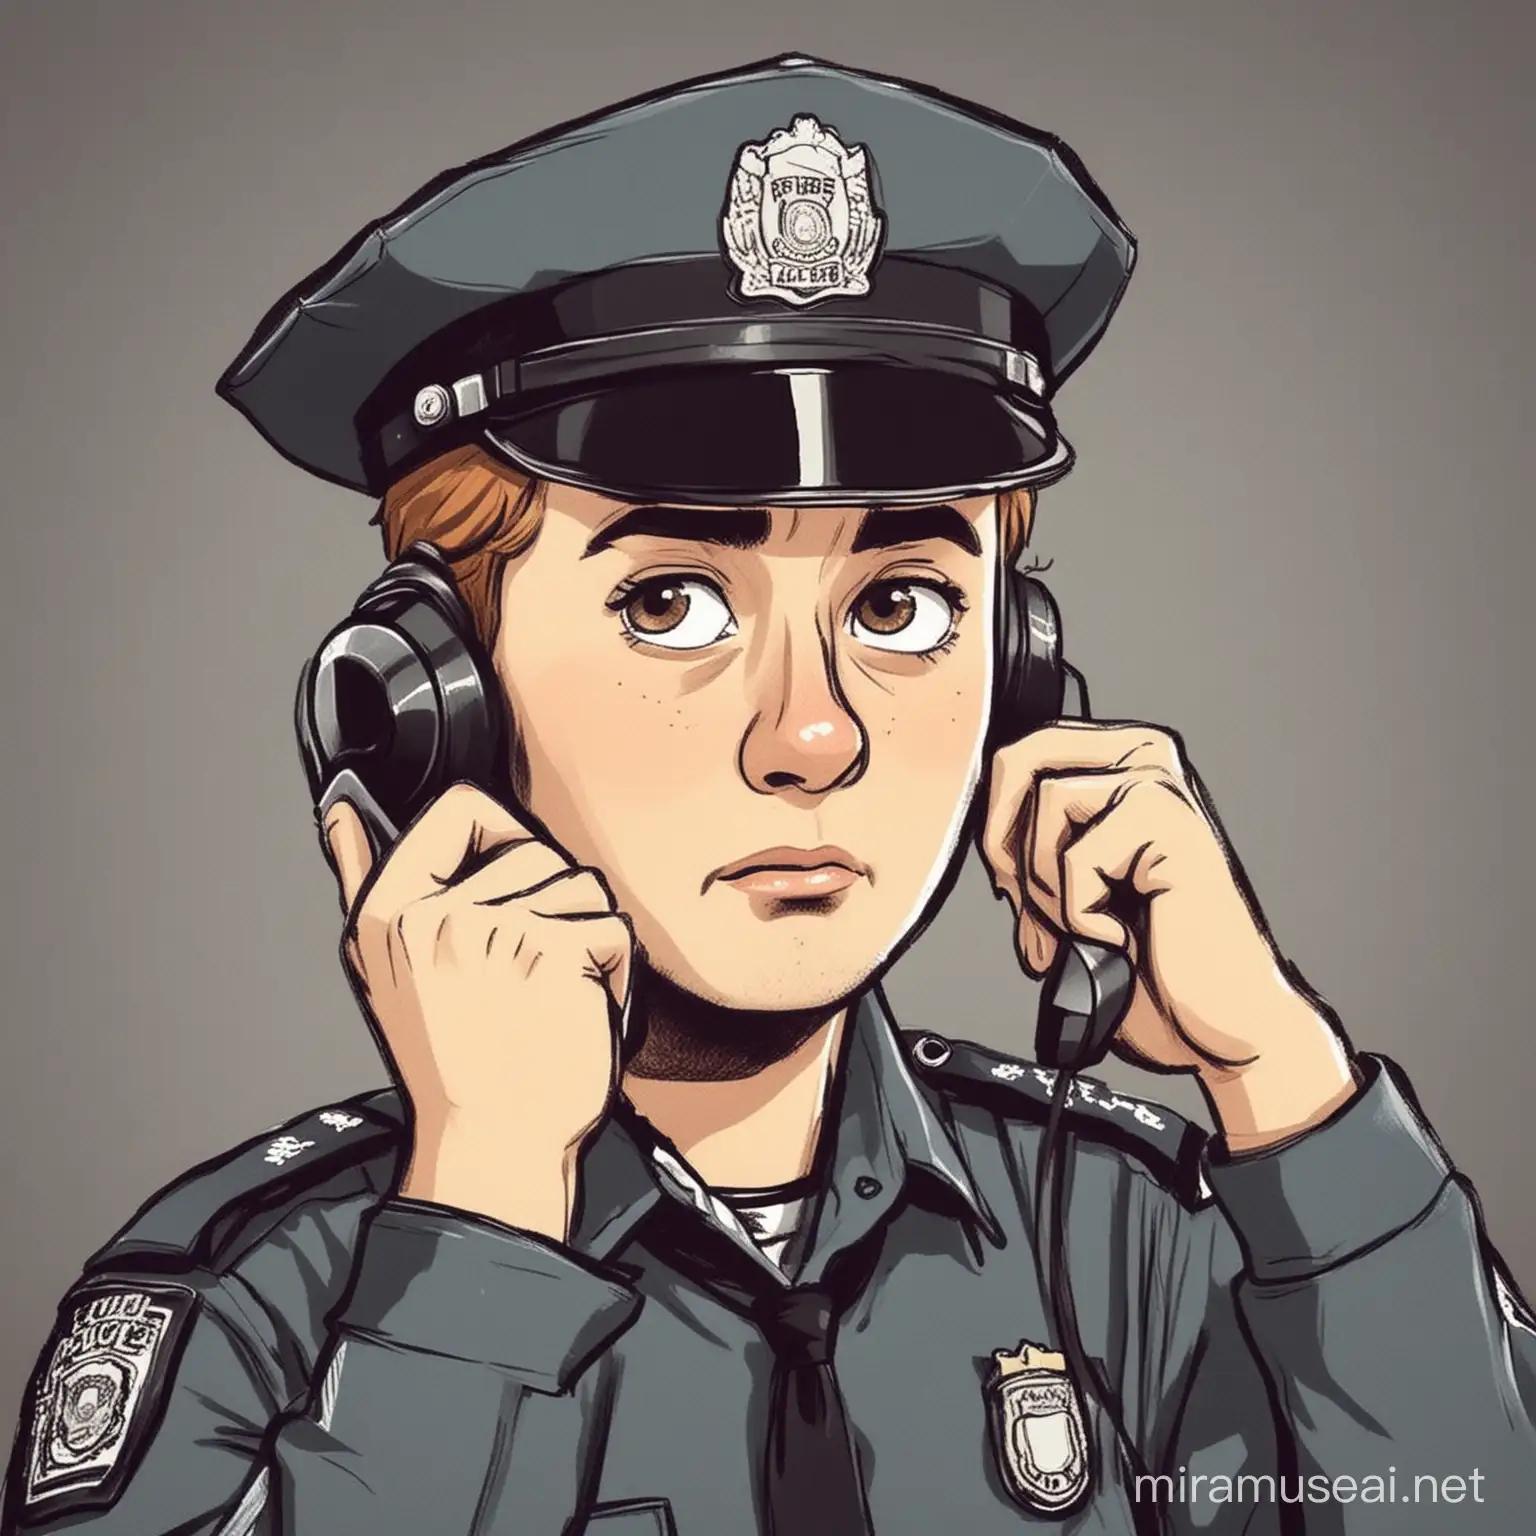 draw a cartoon of a police officer on the phone looking worried calling for help 